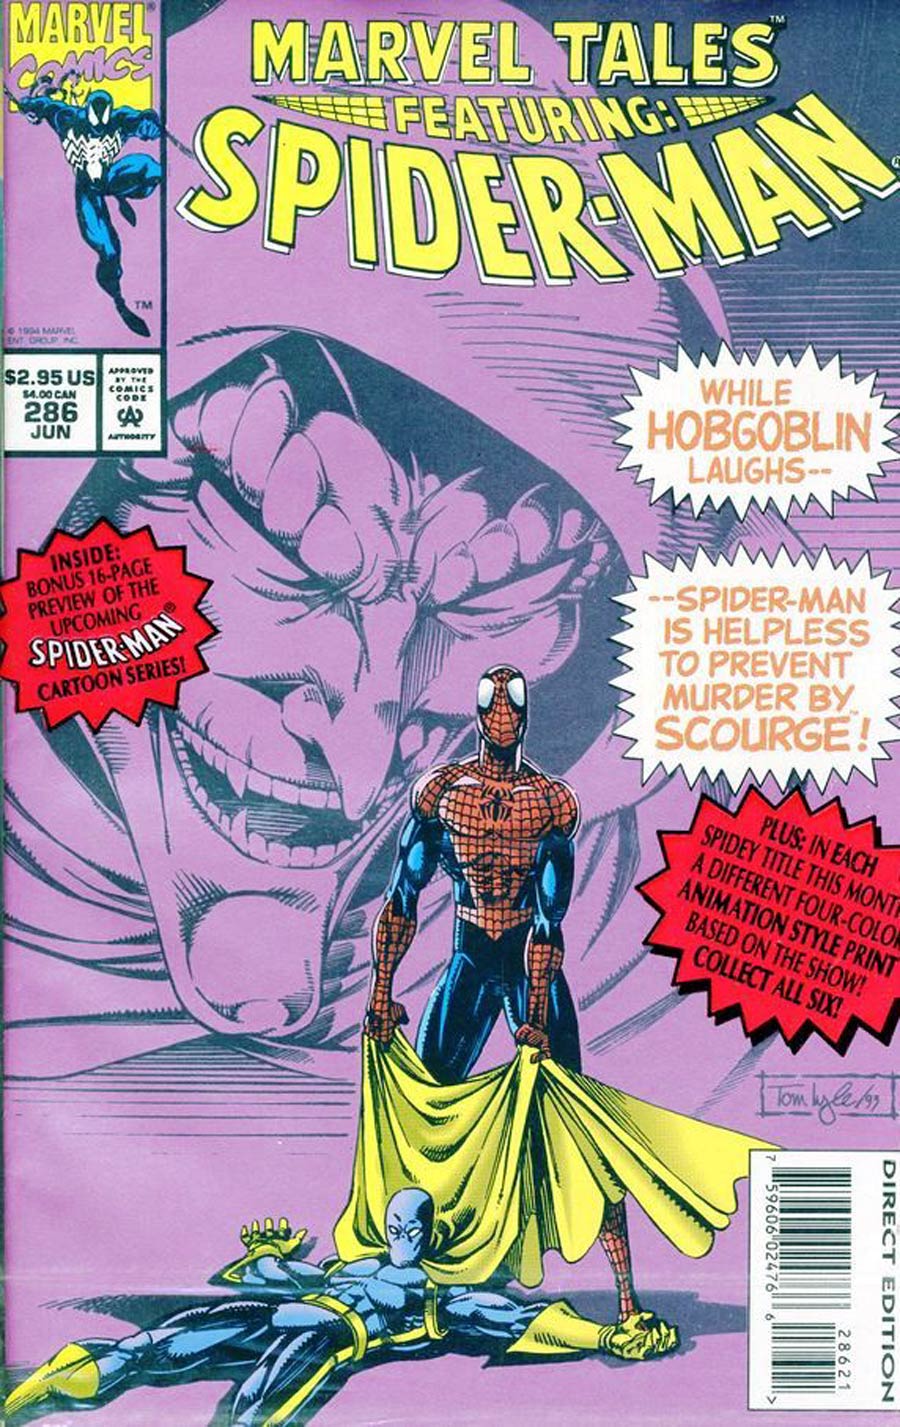 Marvel Tales #286 Cover A Direct Edition With Polybag